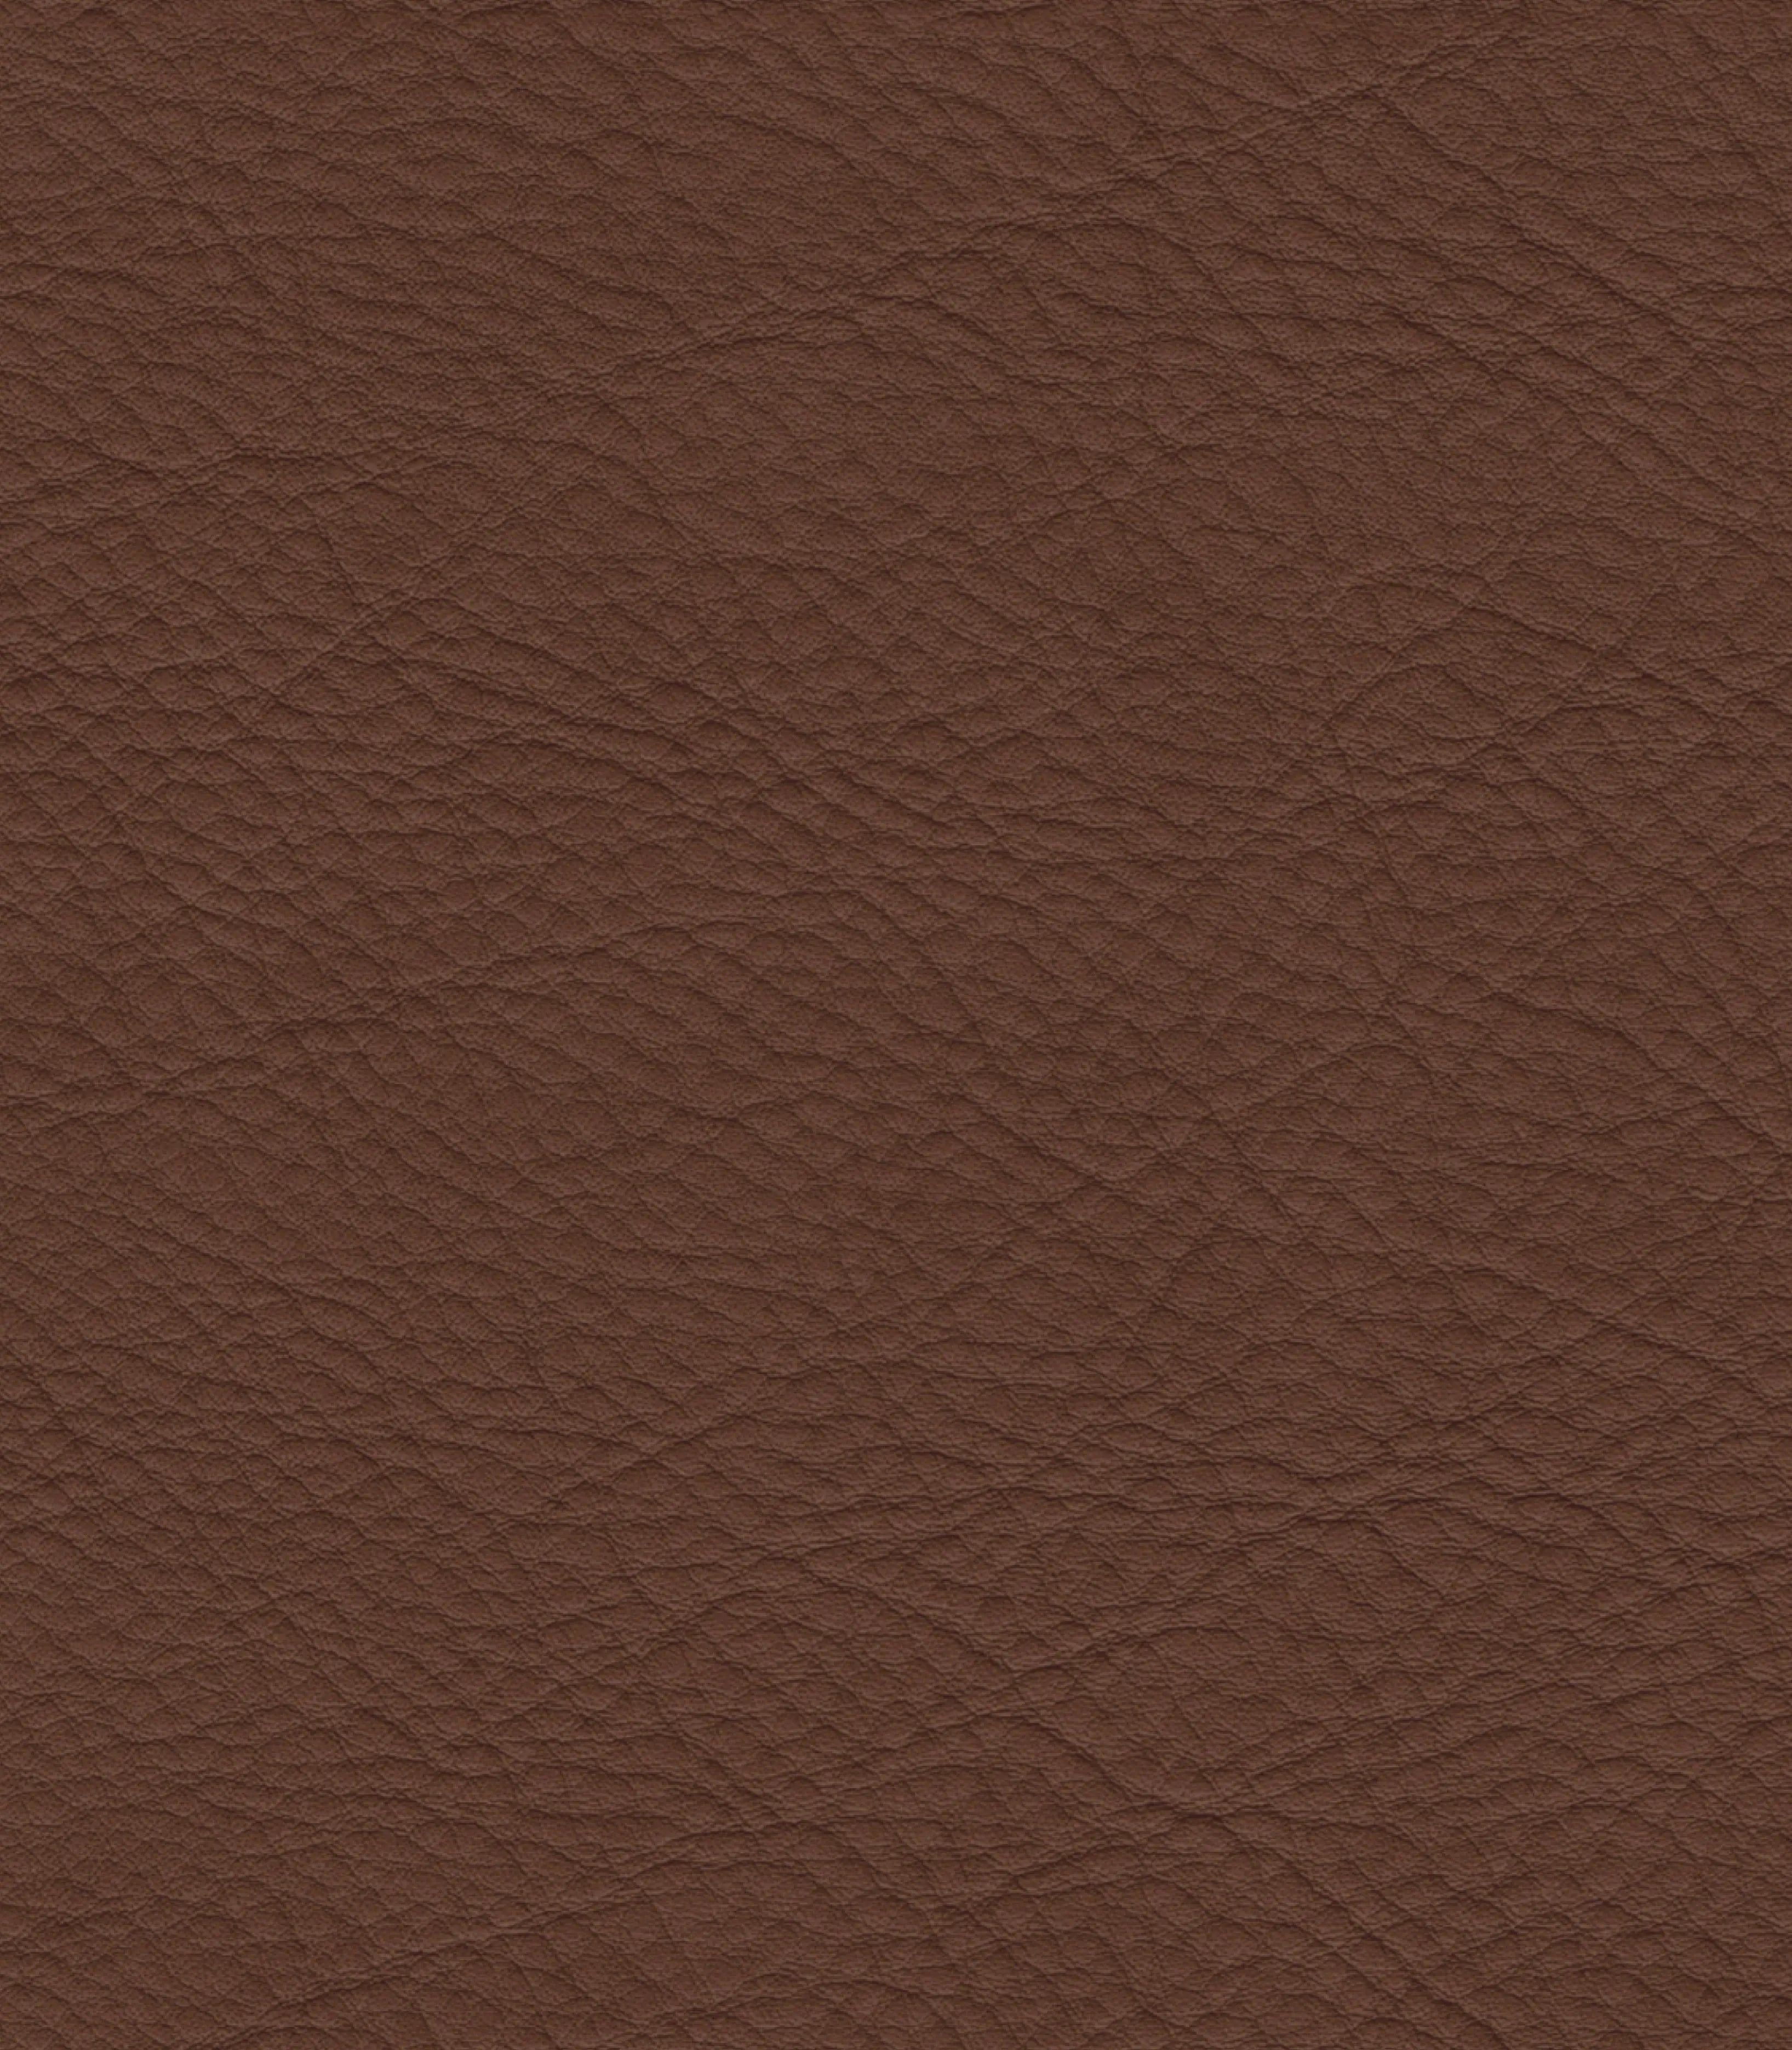 Dallas - Natural Full-Grain Pebbled, Soft and Matte Cowhide Leather